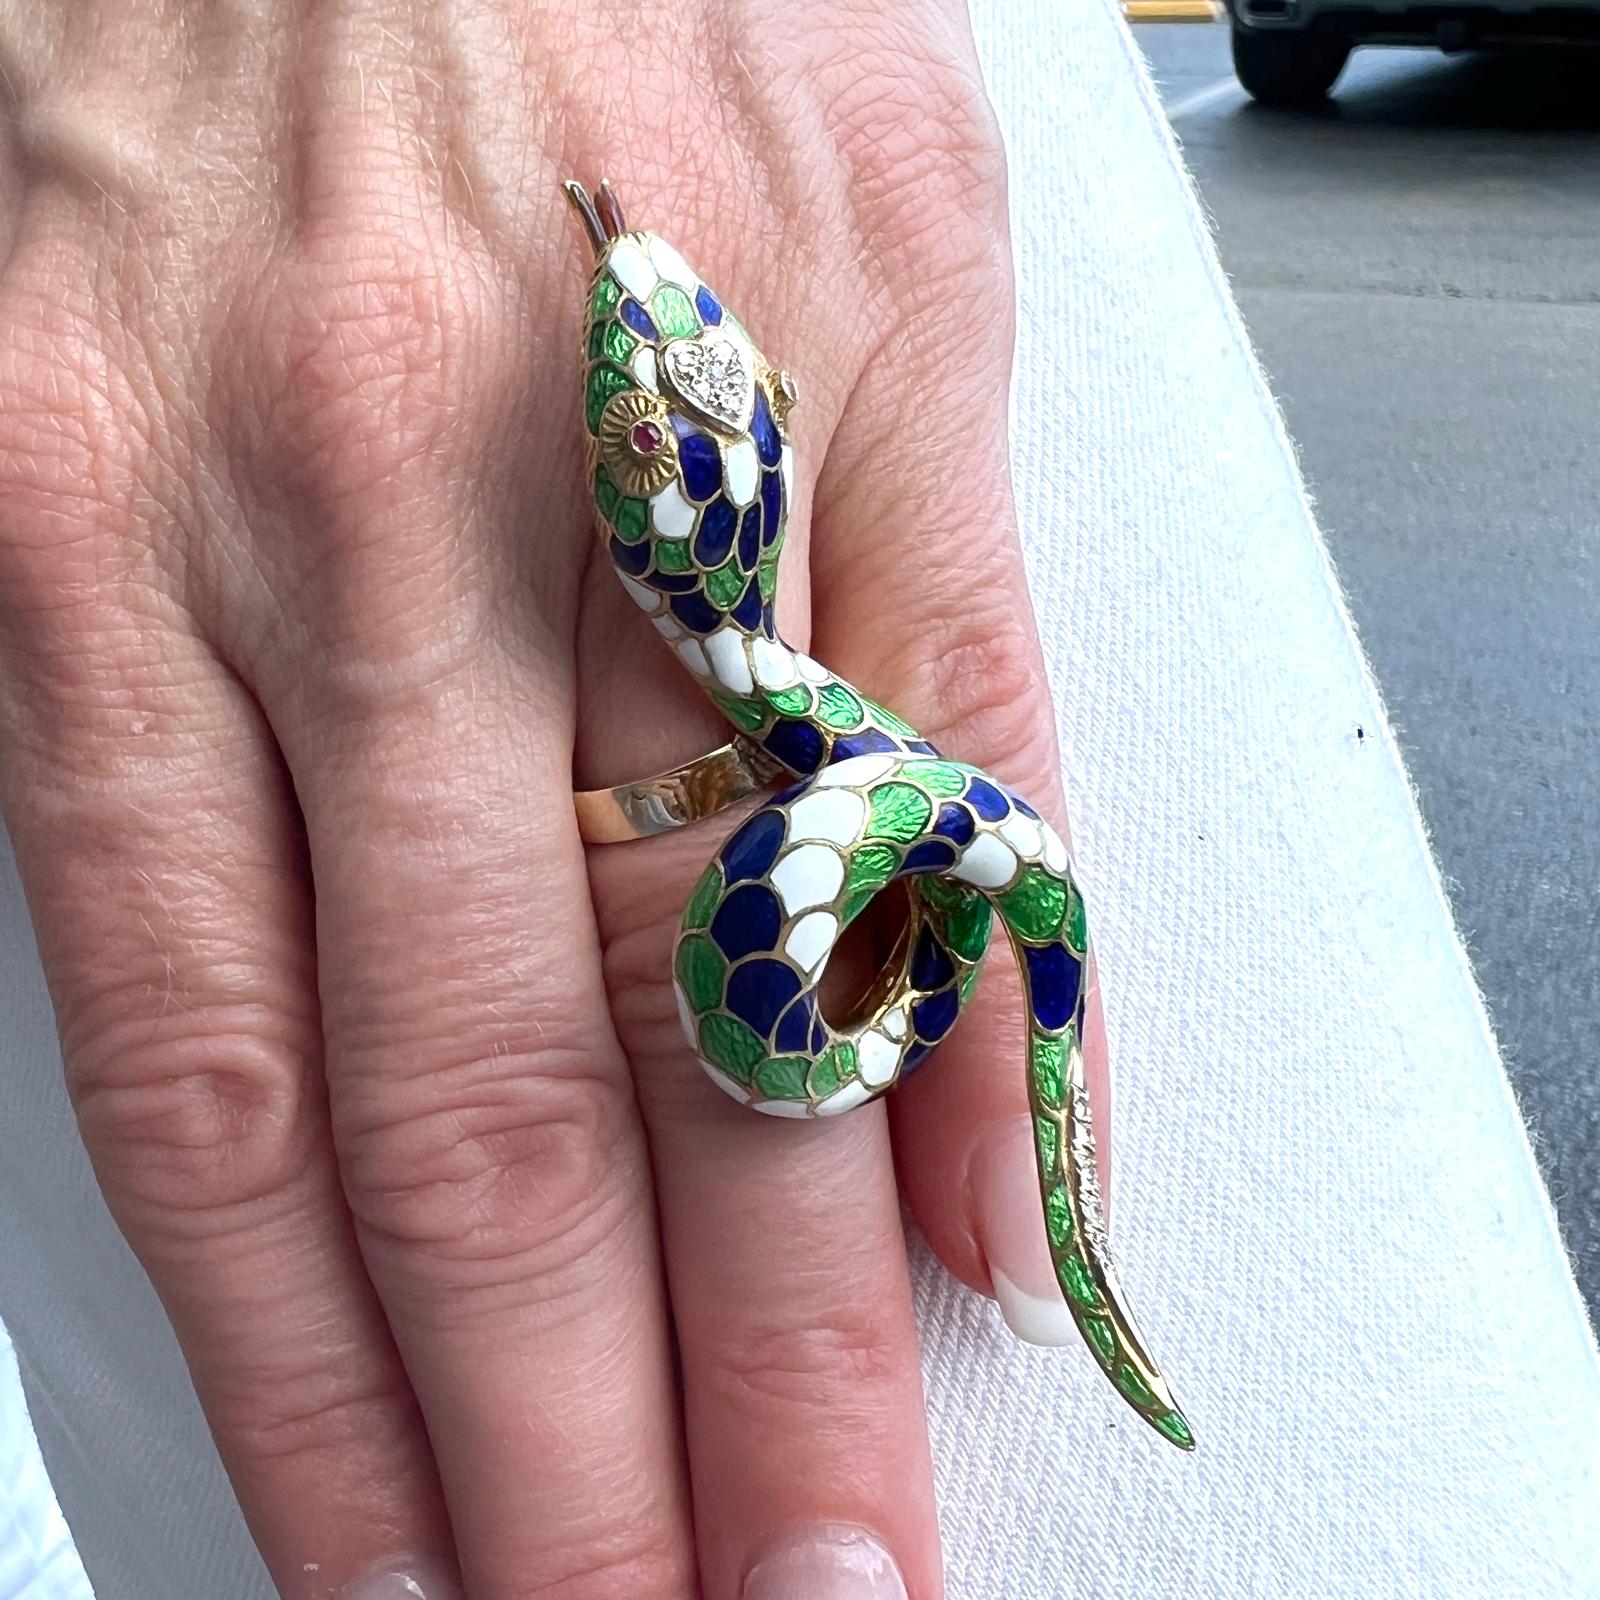 Fabulous statement snake ring crafted in colorful enamel and 18 karat yellow gold. The snake features diamond and ruby accents together with colorful blue, green, and white enamel. The snake measures 1.00 x 3.00 inches, and is currently size 6.5